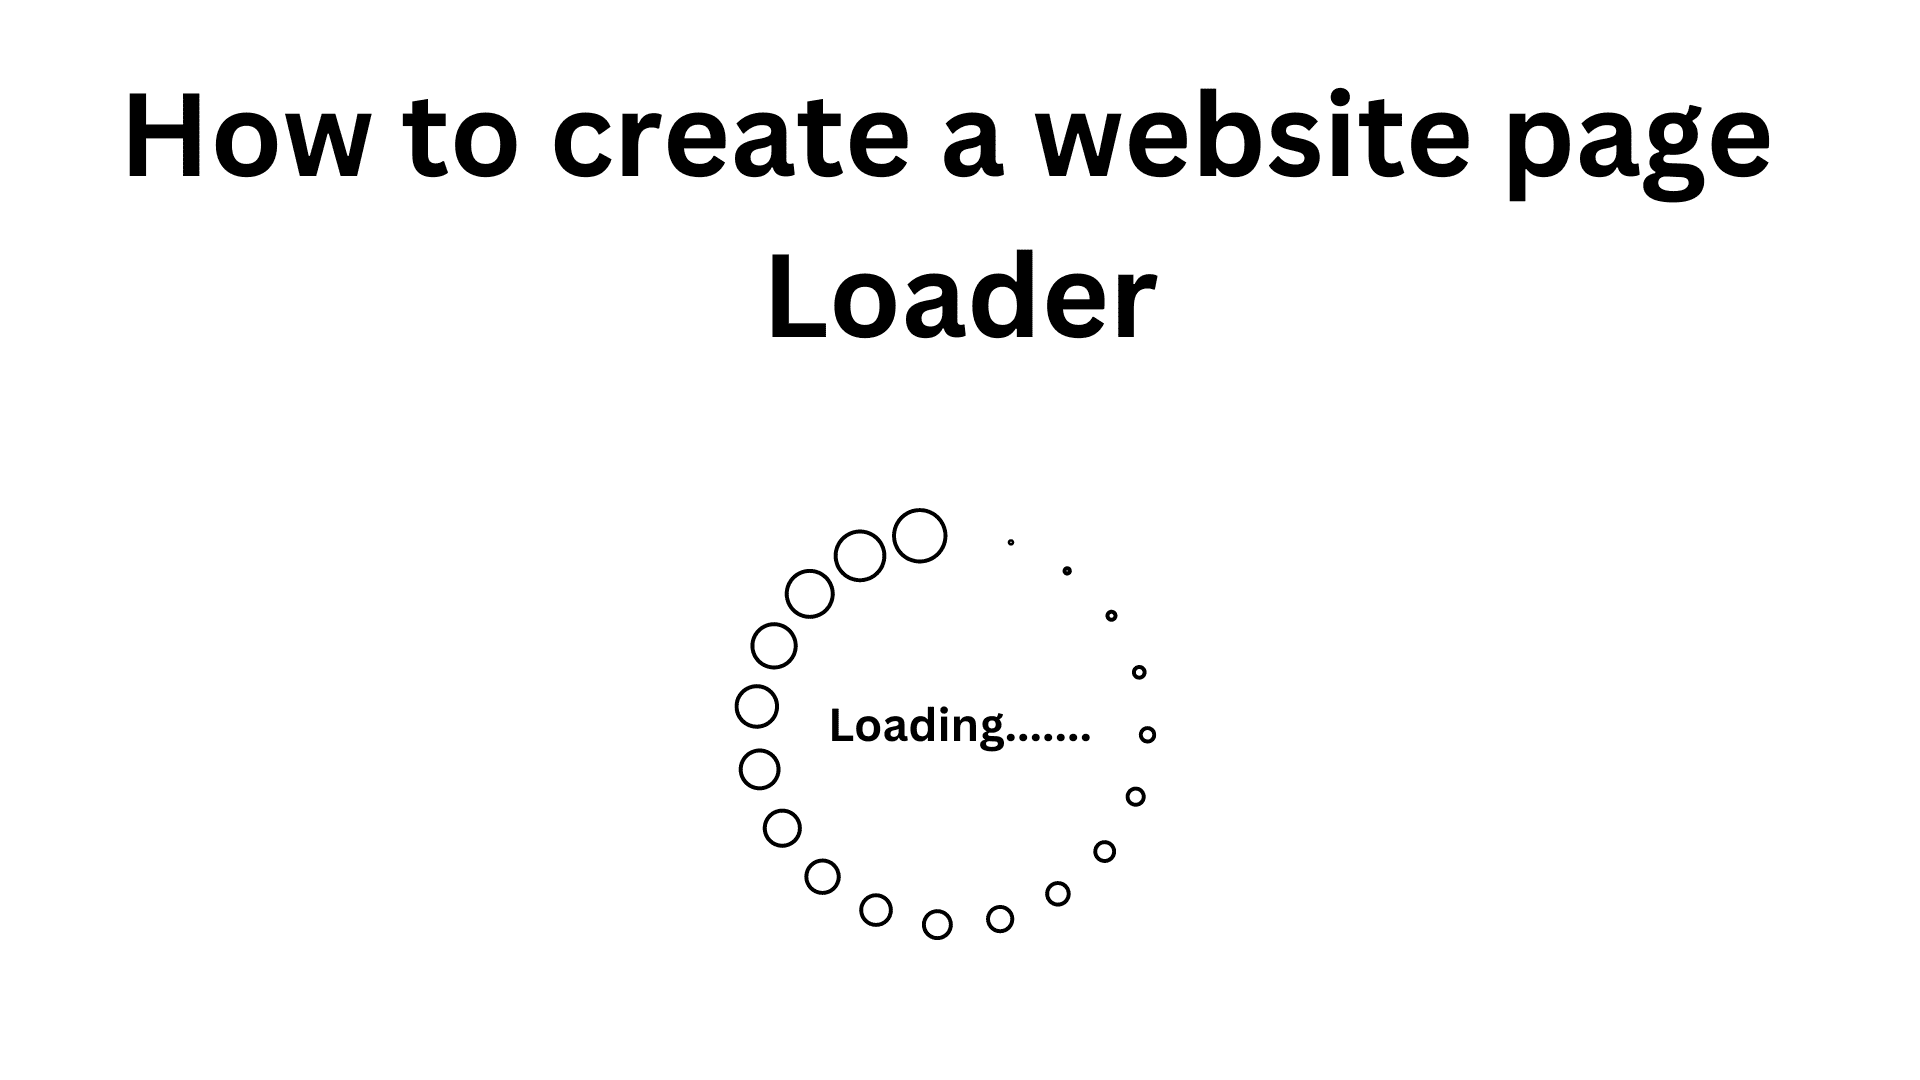 How to create working website page loader